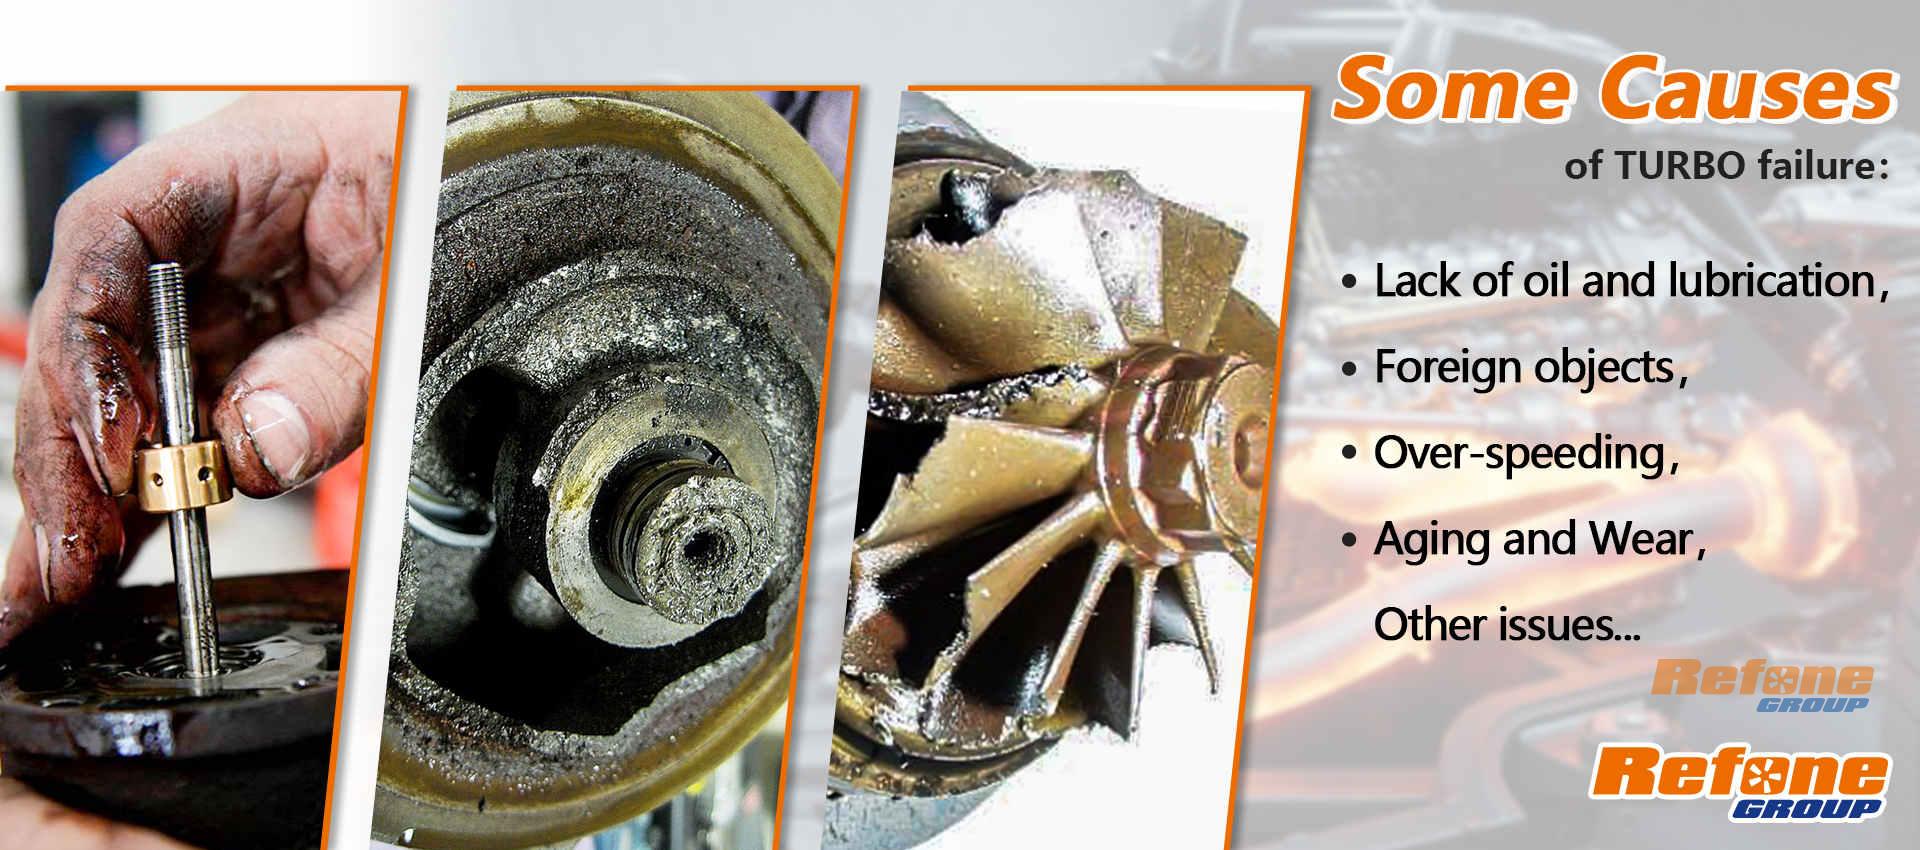 Some causes of TURBO failure